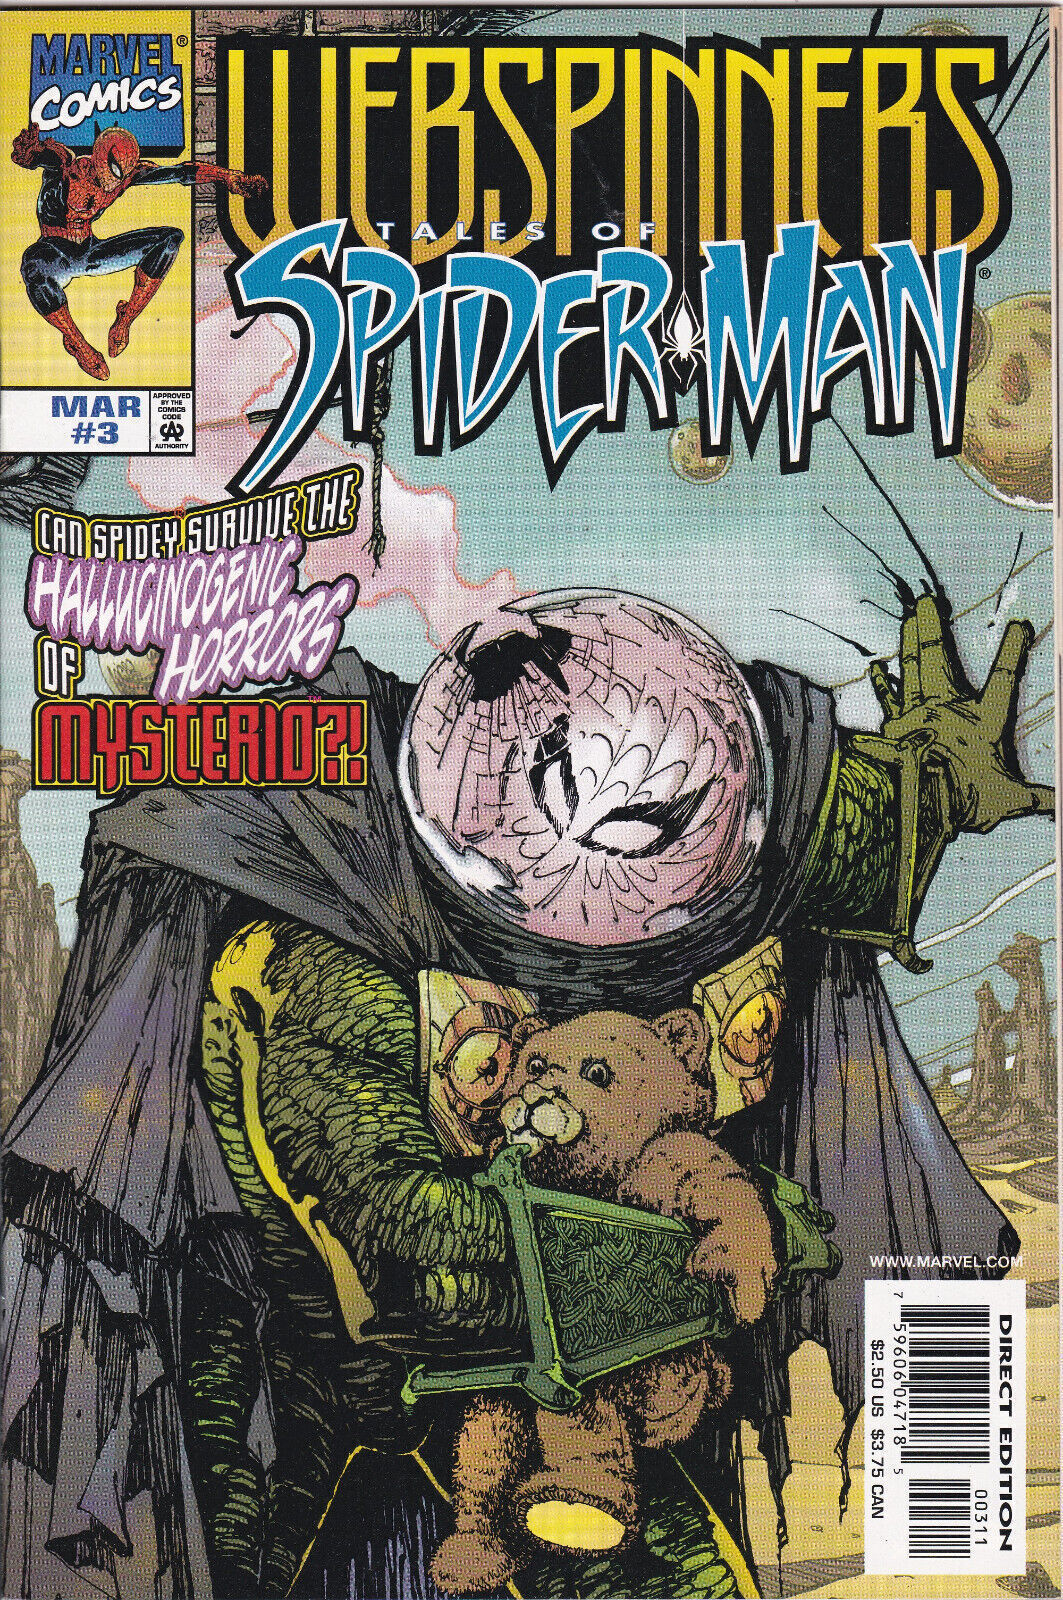 Webspinners: Tales of Spider-Man #3 (1999-2000) Marvel Comics